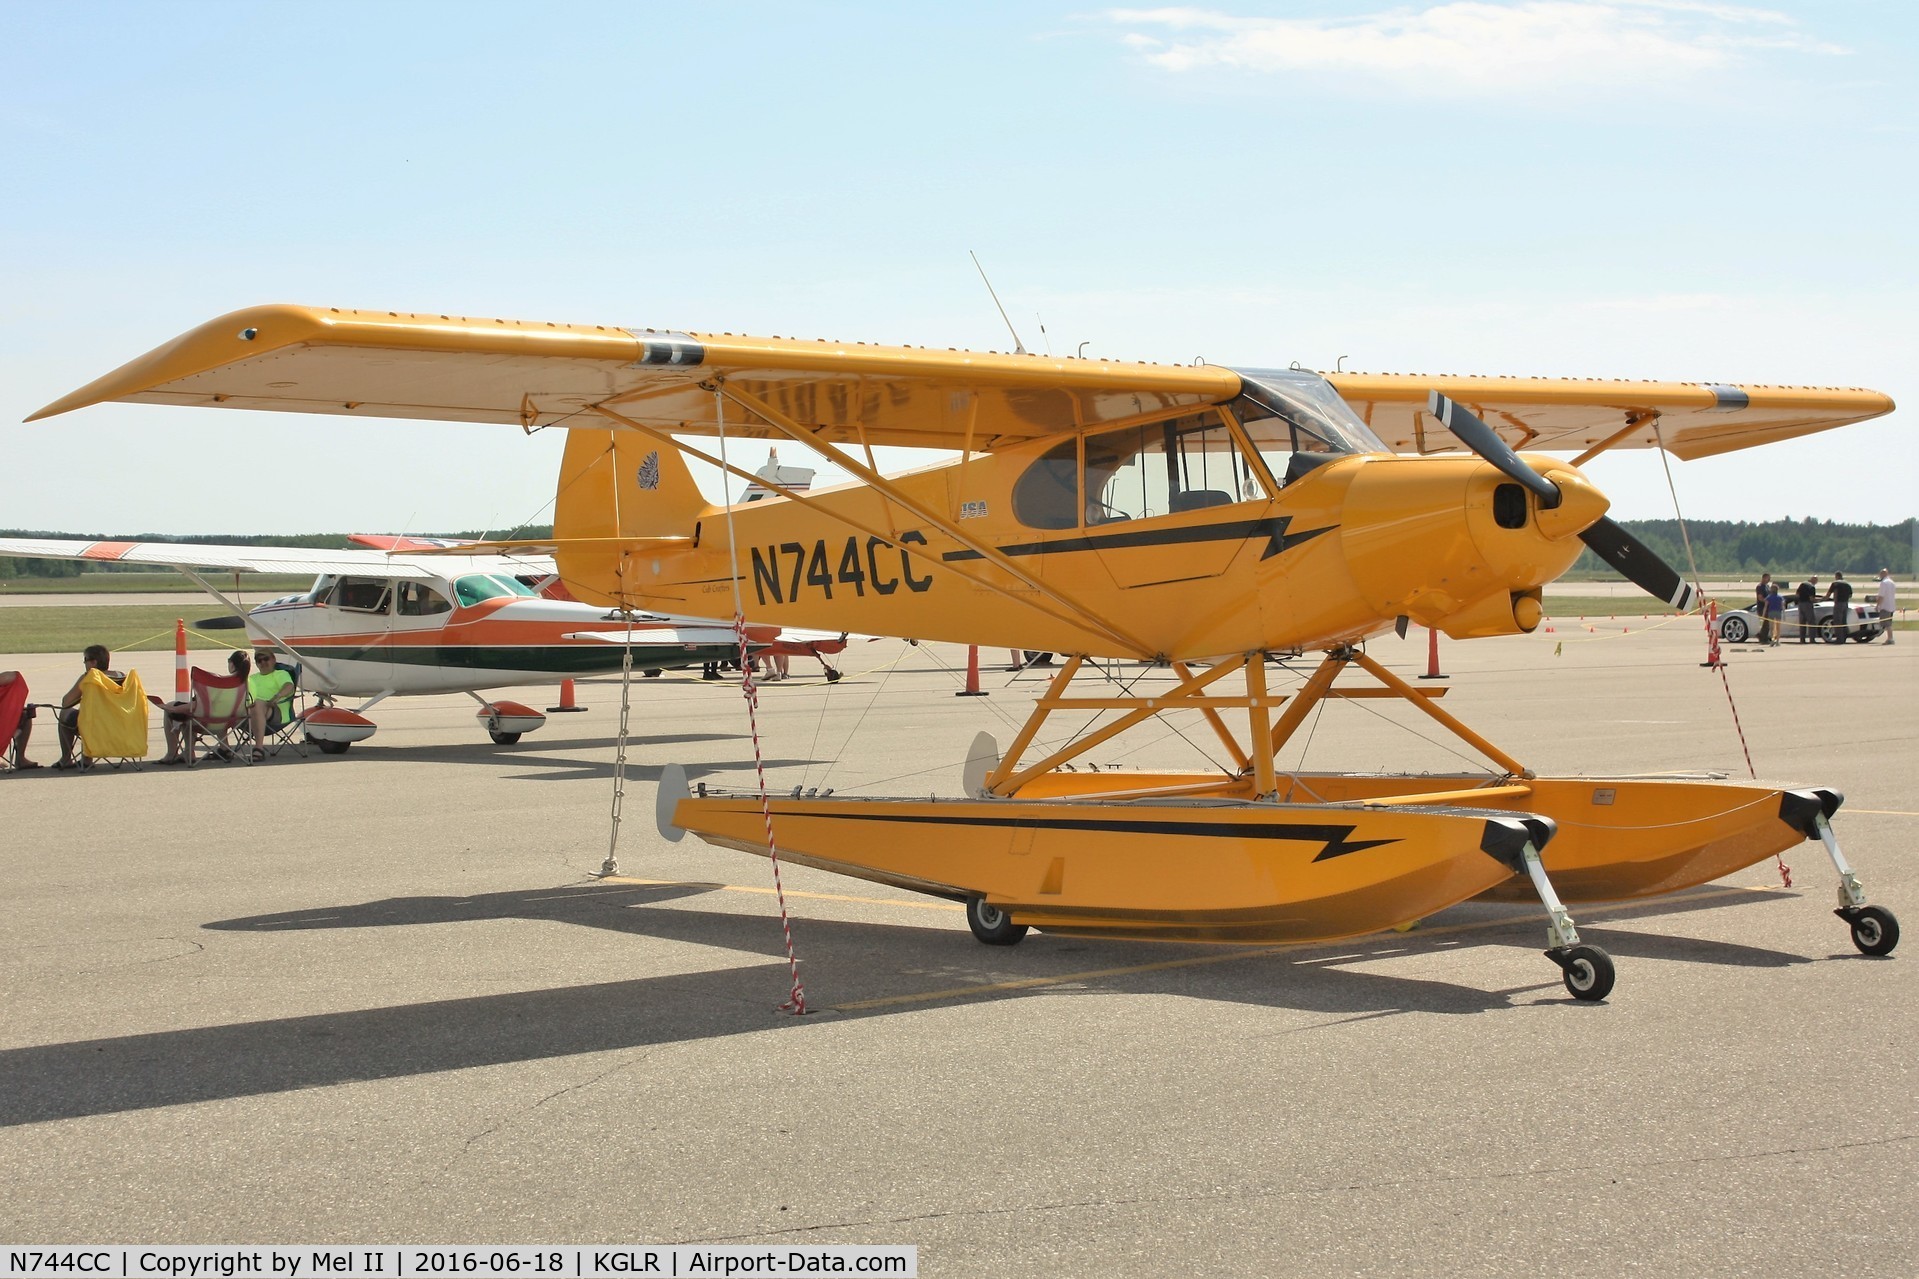 N744CC, 2001 Piper/cub Crafters PA-18-150 C/N 9928CC, Parked